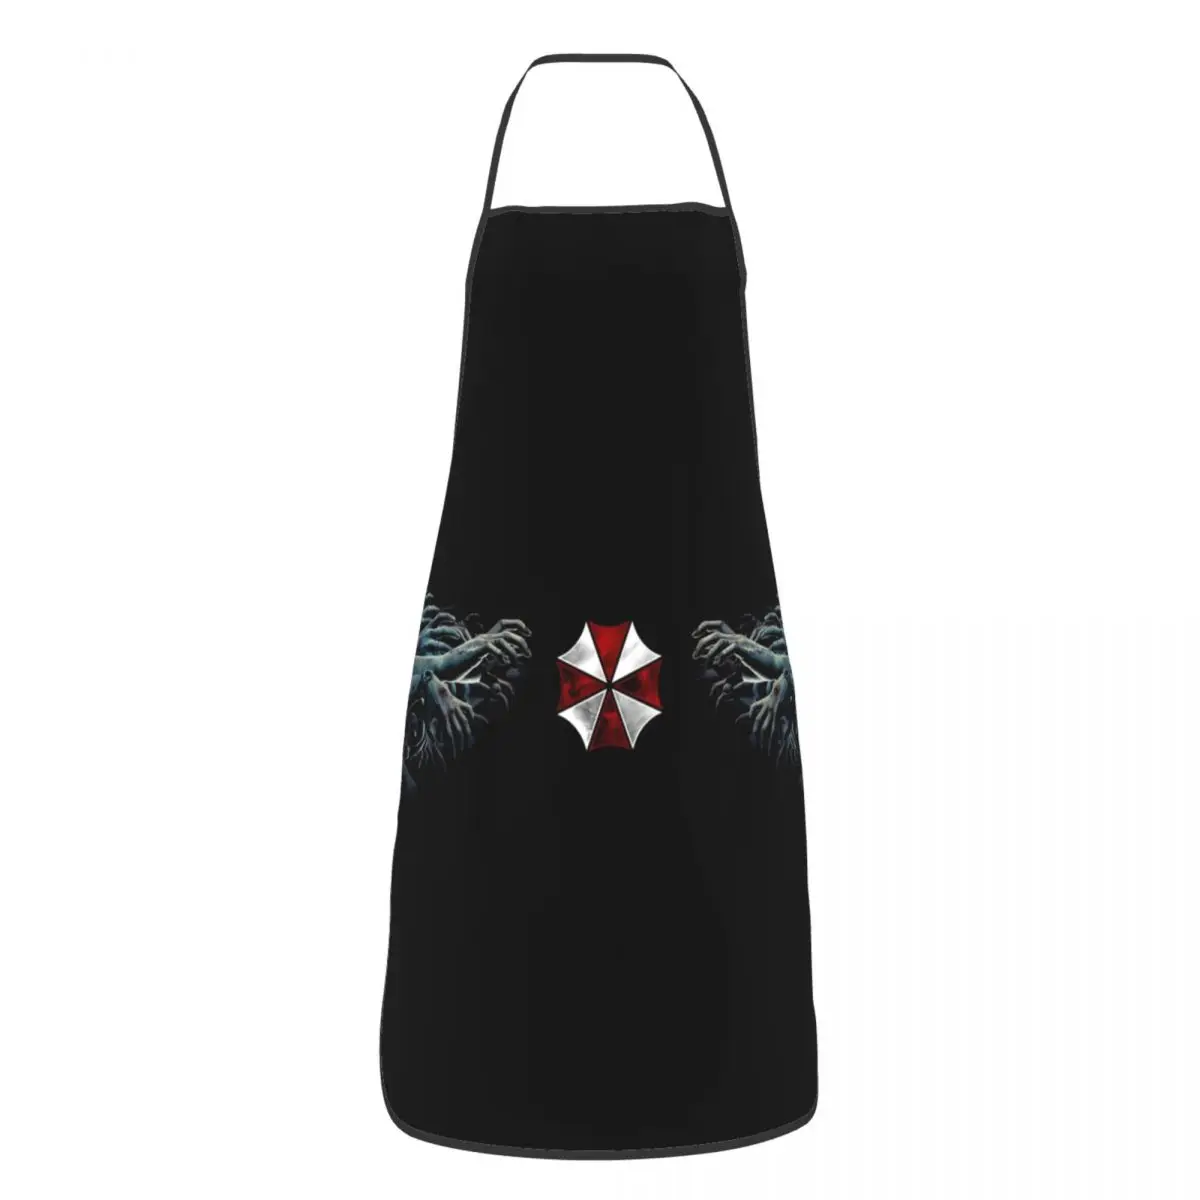 

Umbrella Corporation Funny Aprons Horror Zombie Video Game Adult Unisex Kitchen Chef Bib Tablier Cuisine Cooking Baking Painting